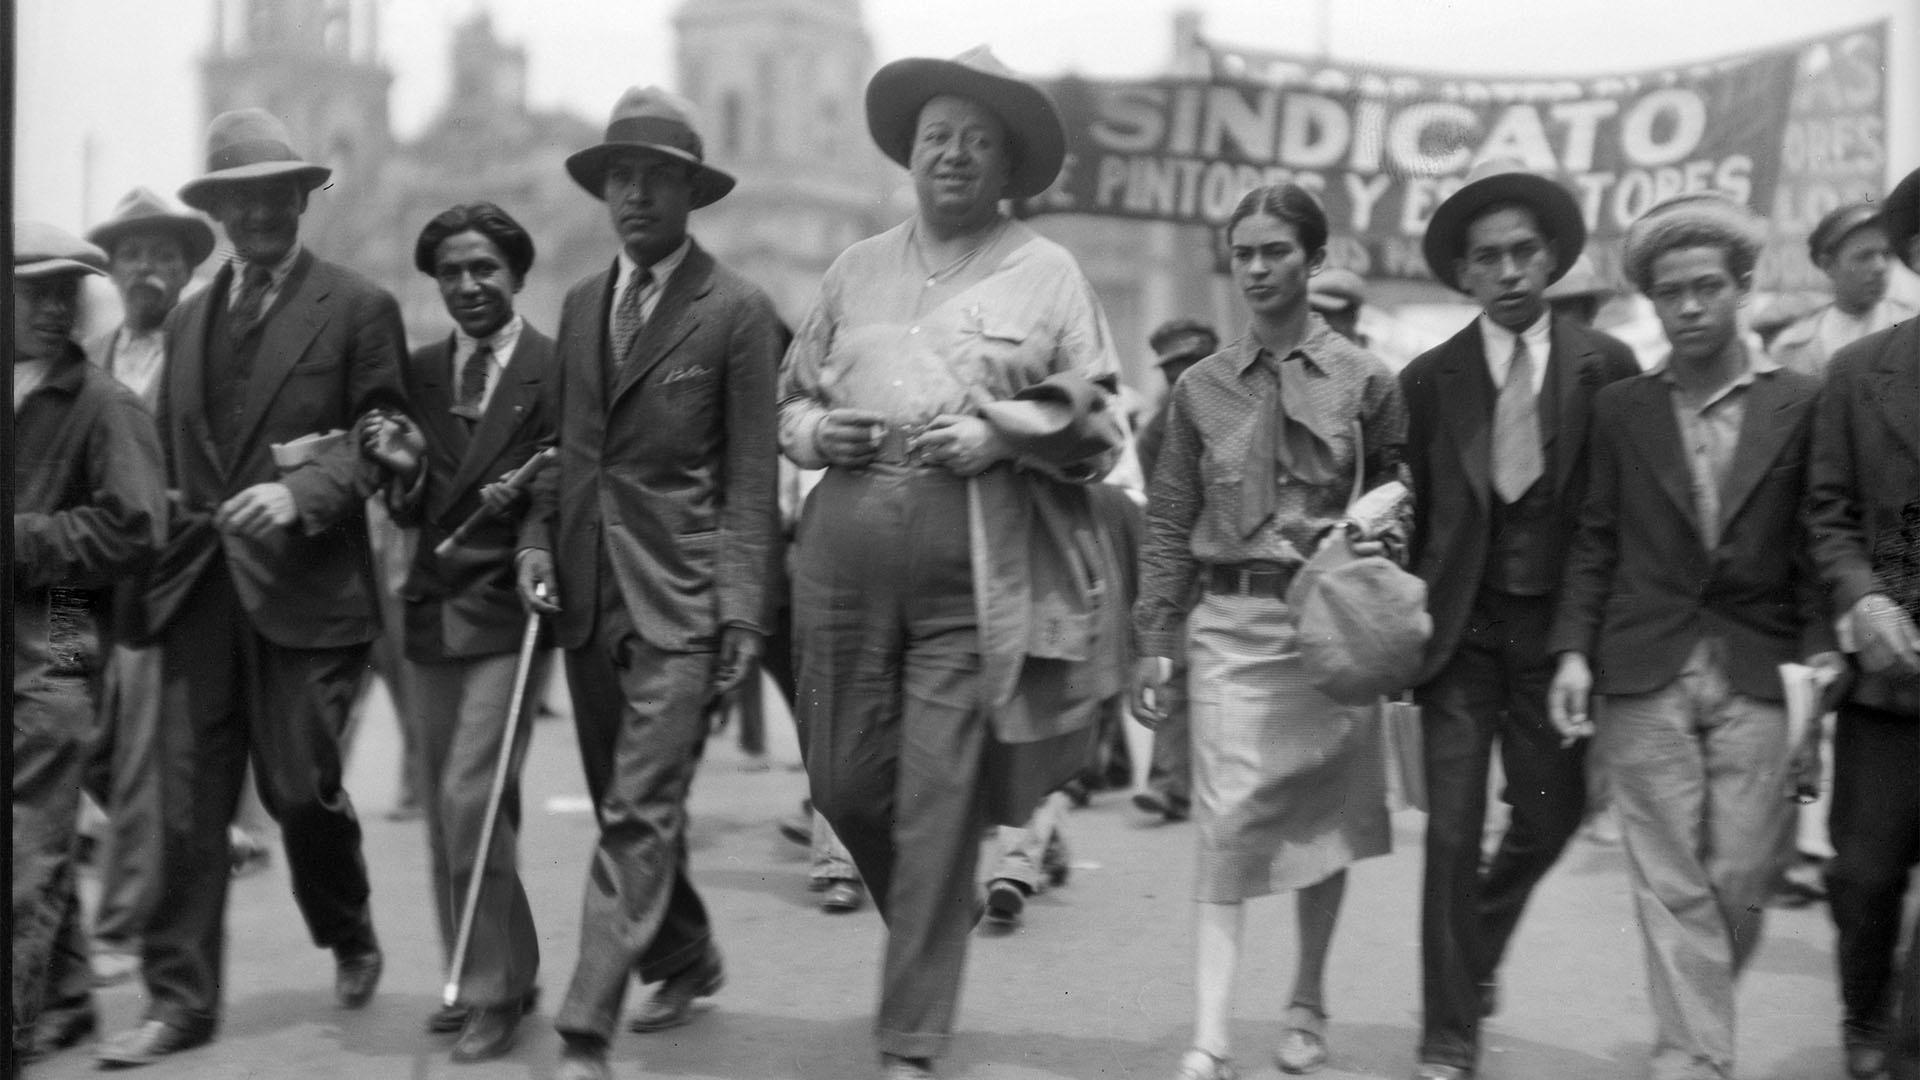 Diego Rivera, Frida Kahlo and other intellectuals march on Labor Day in Mexico, May 1, 1929.